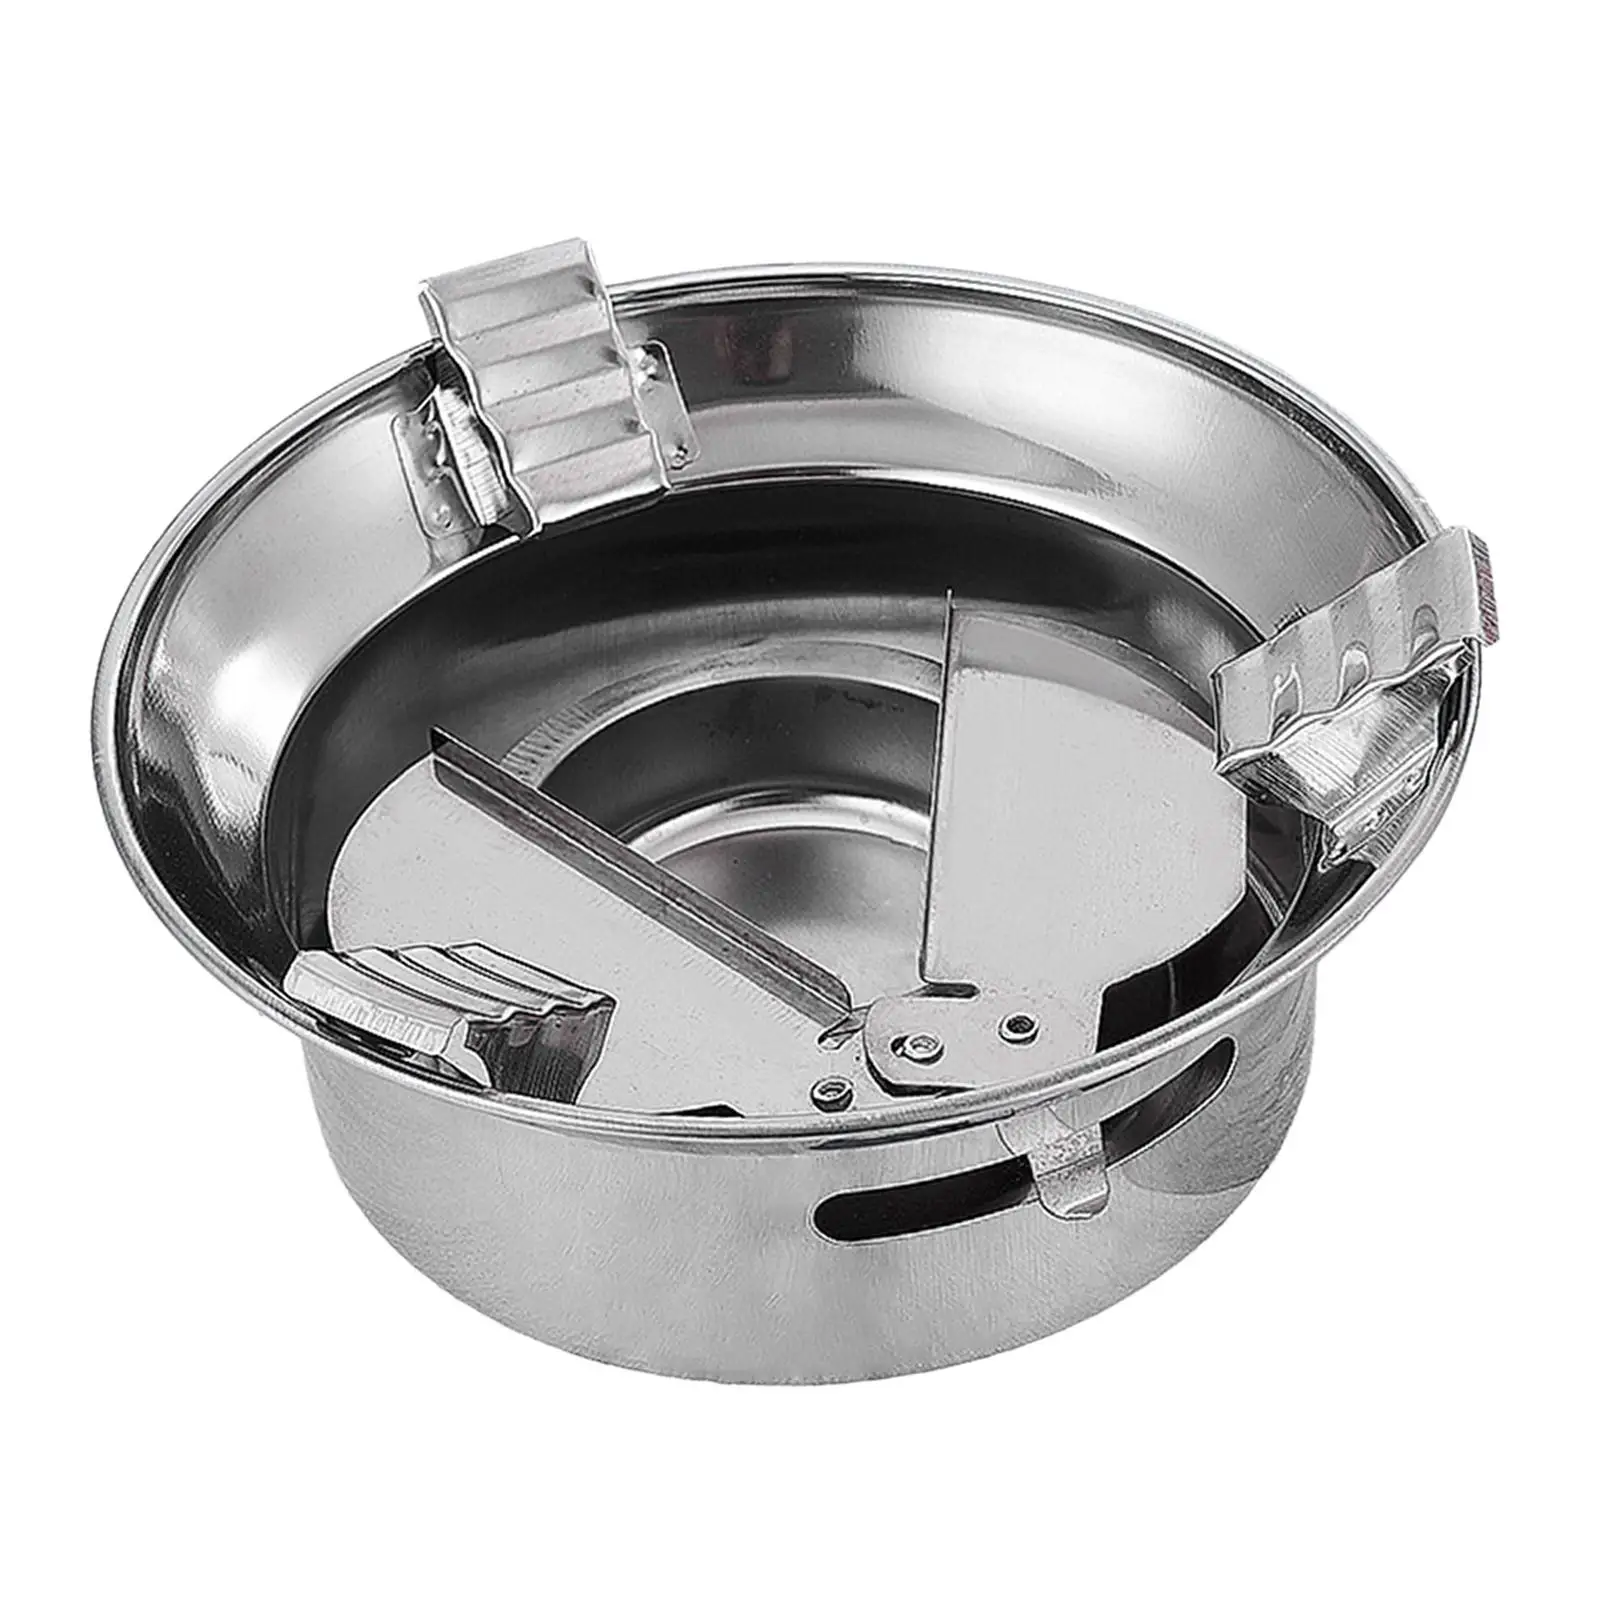 Outdoor Alcohol Stainless Steel Anti Slip Base Convenient to Store and Carry